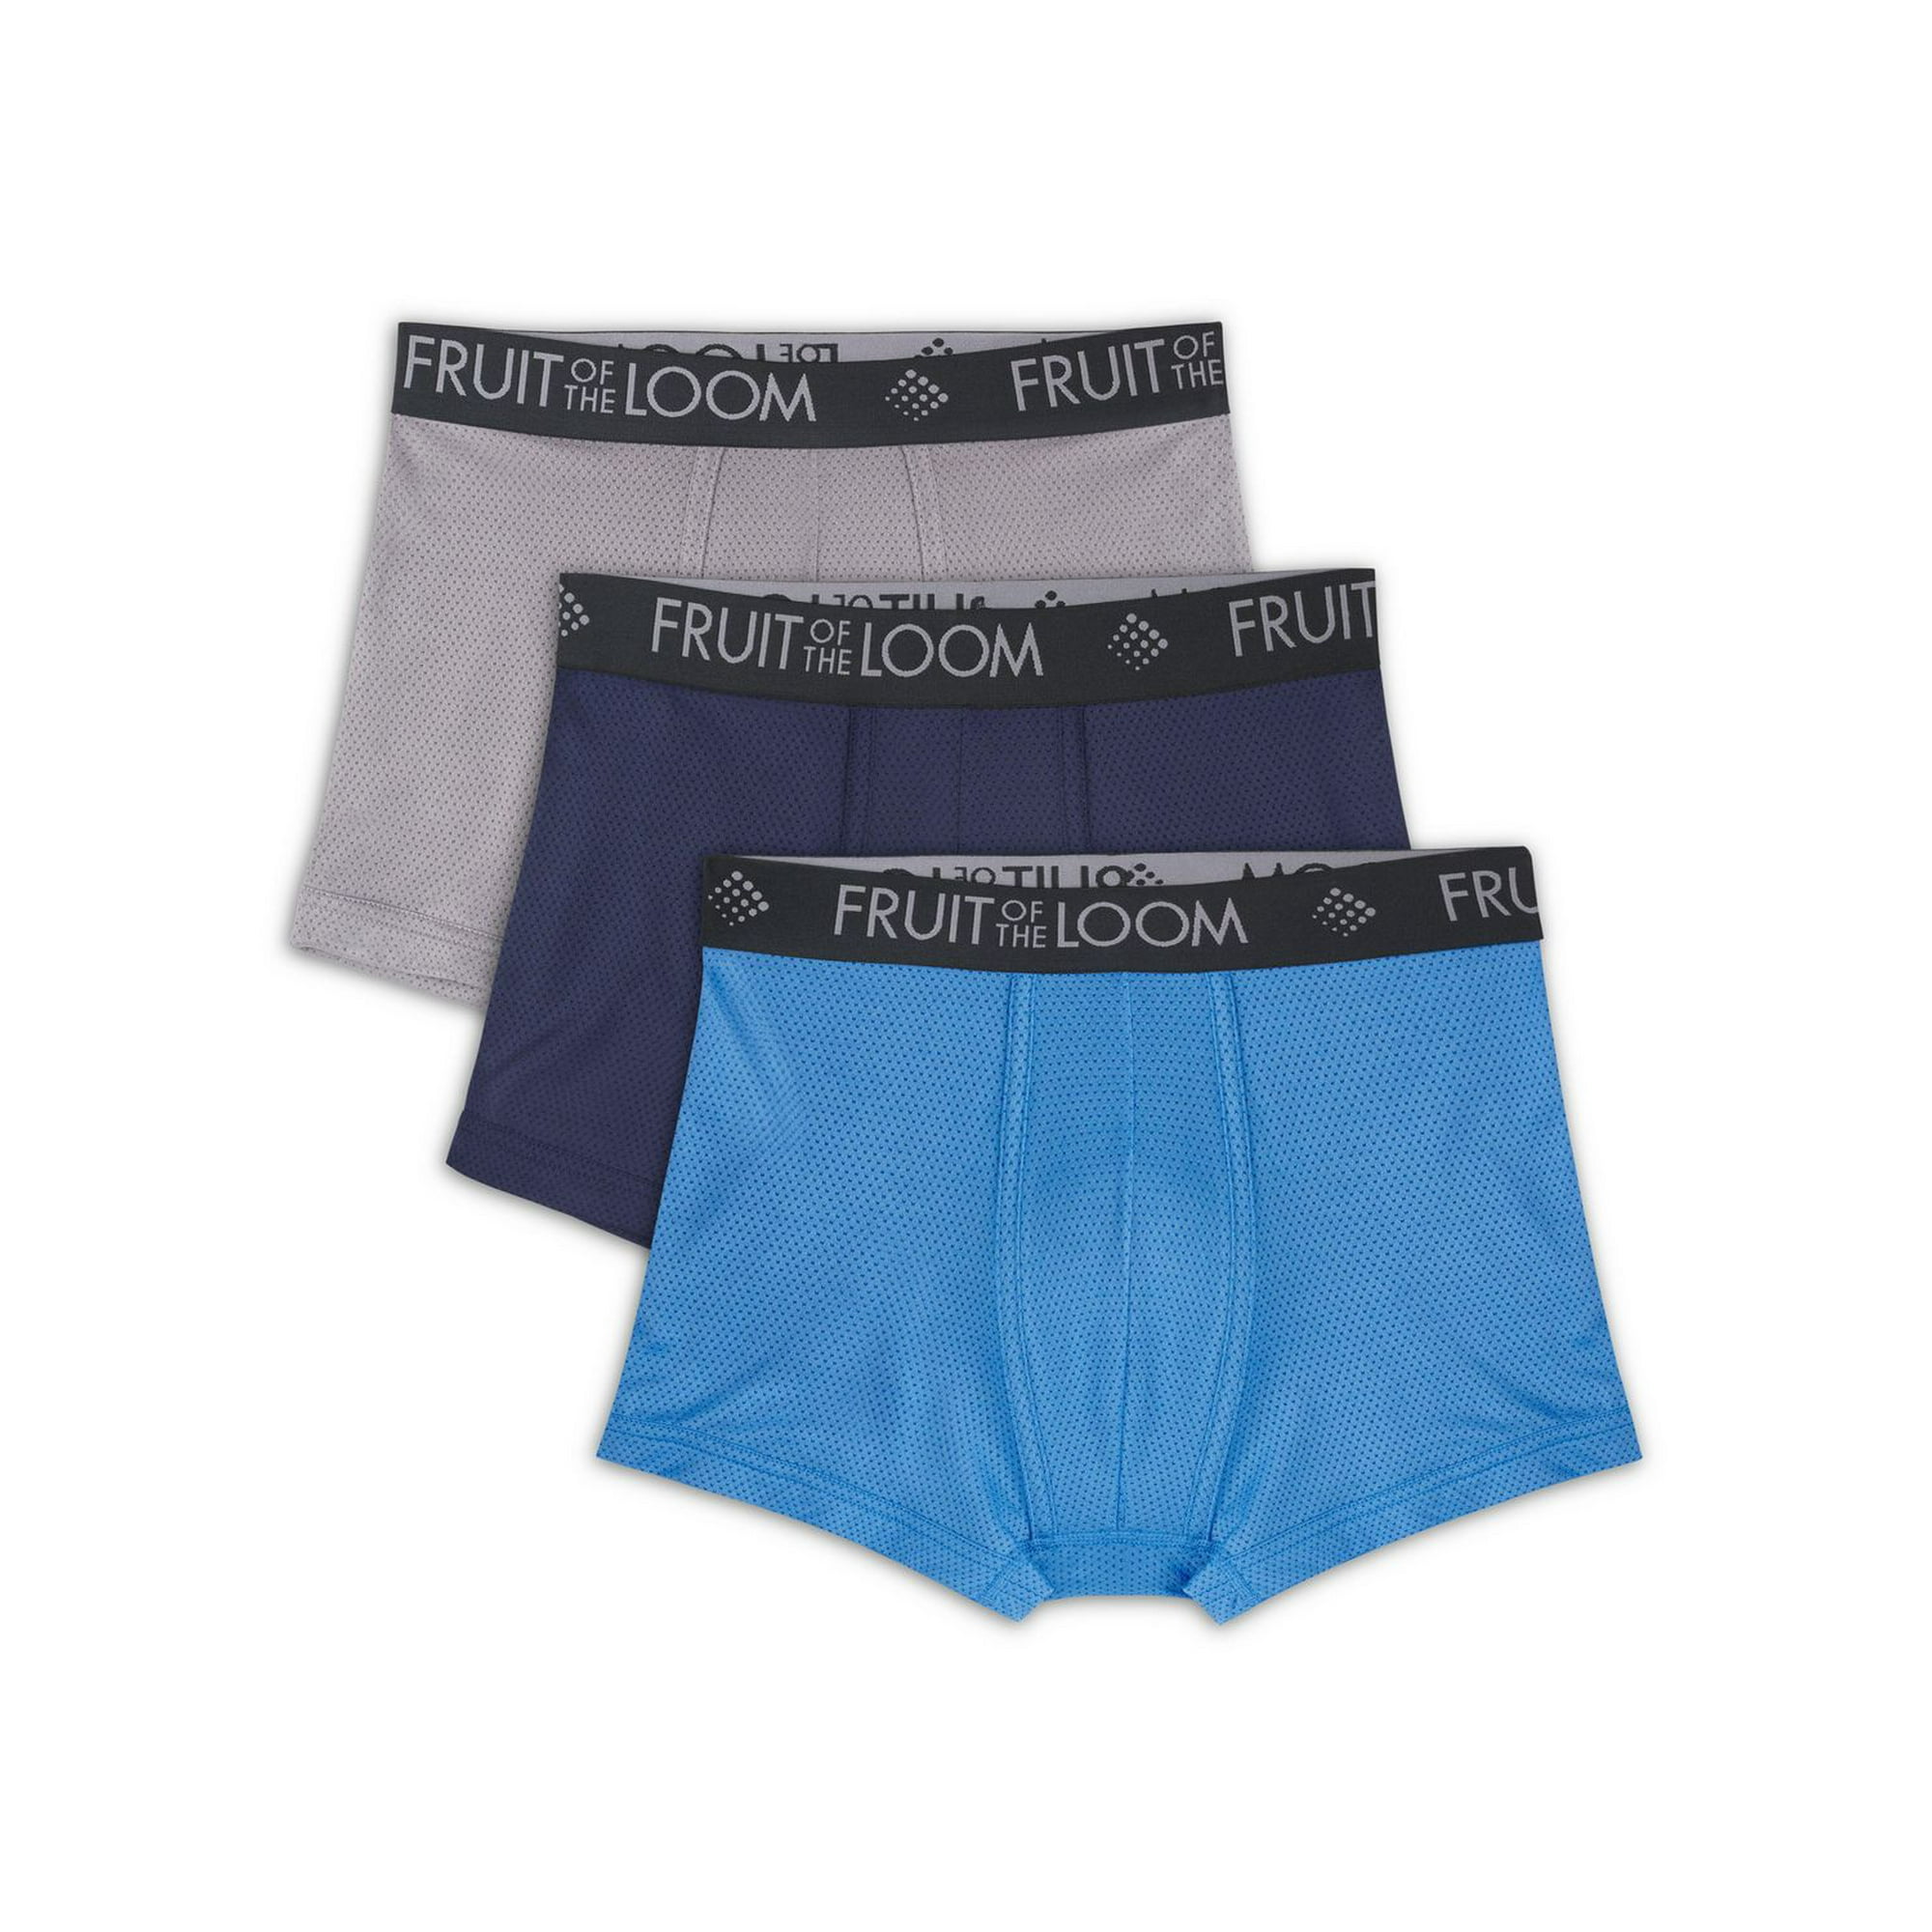 Fruit of the Loom Men's Breathable Micromesh Short Leg Boxer Brief/Trunk, 3  pack, Sizes S to XL